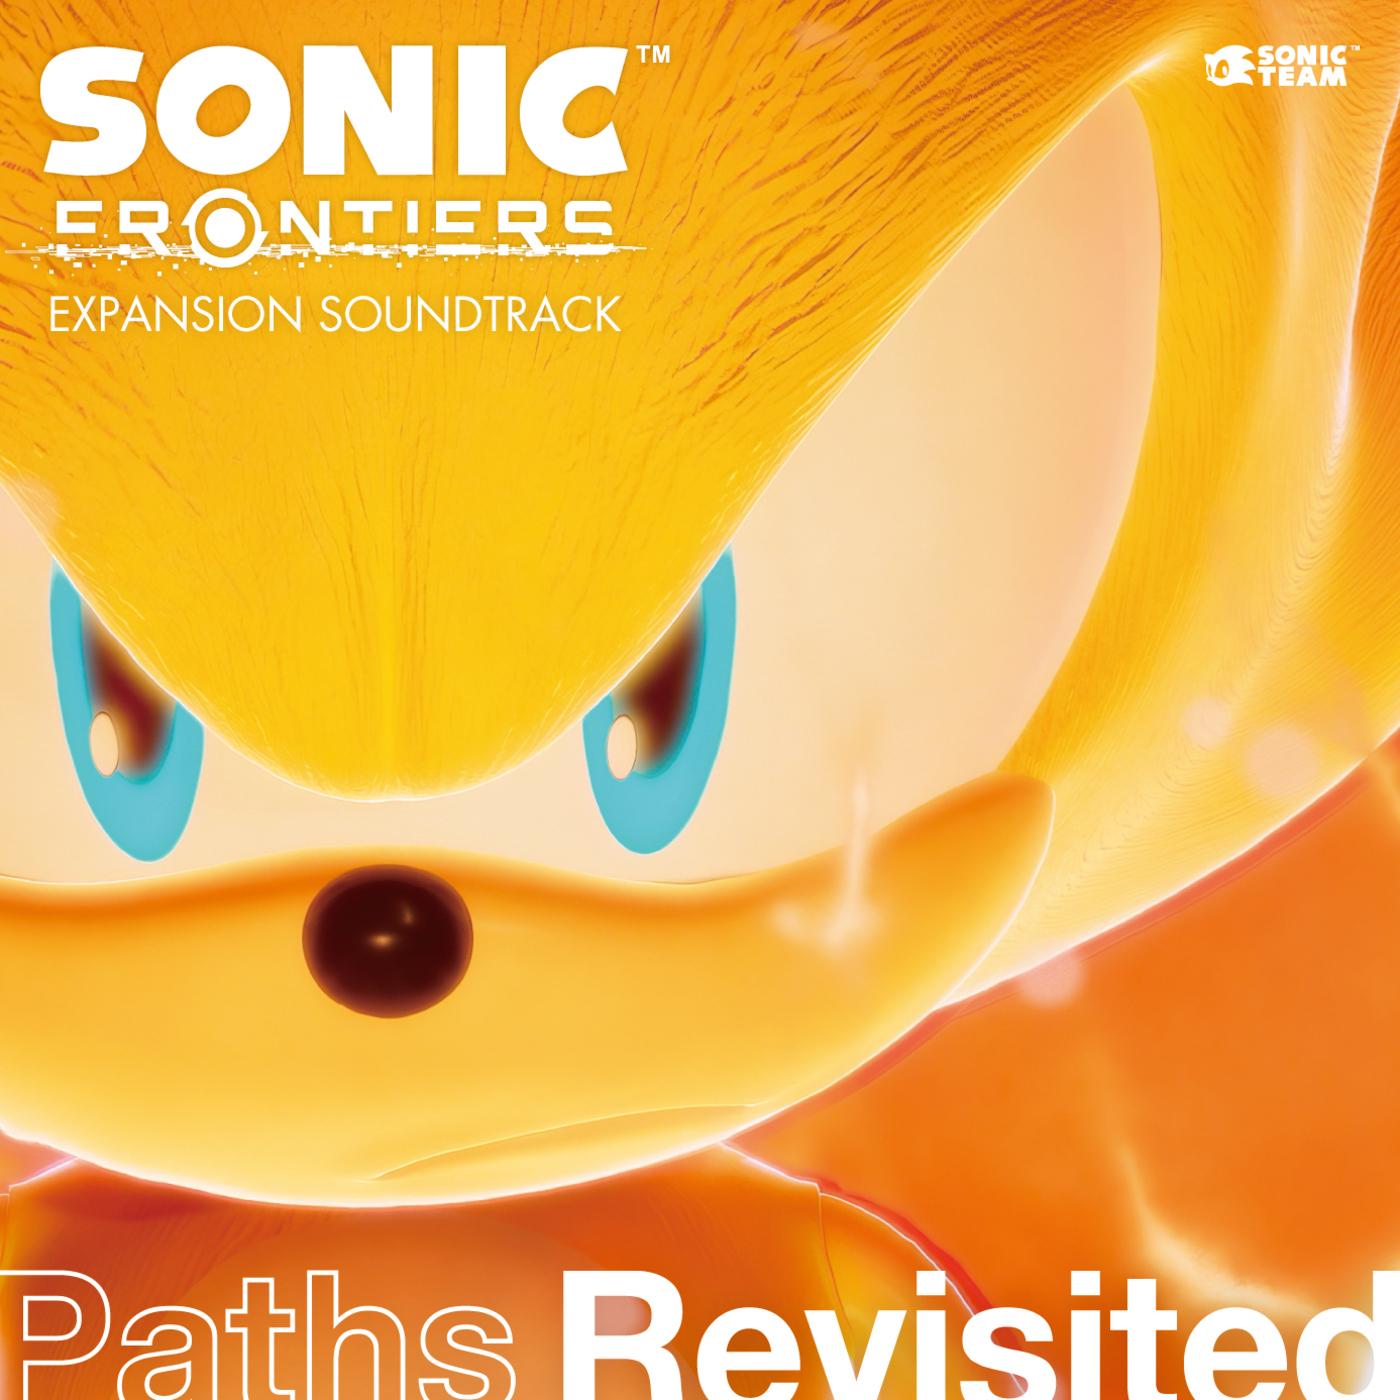 Sonic Frontiers Expansion Soundtrack: Paths Revisited